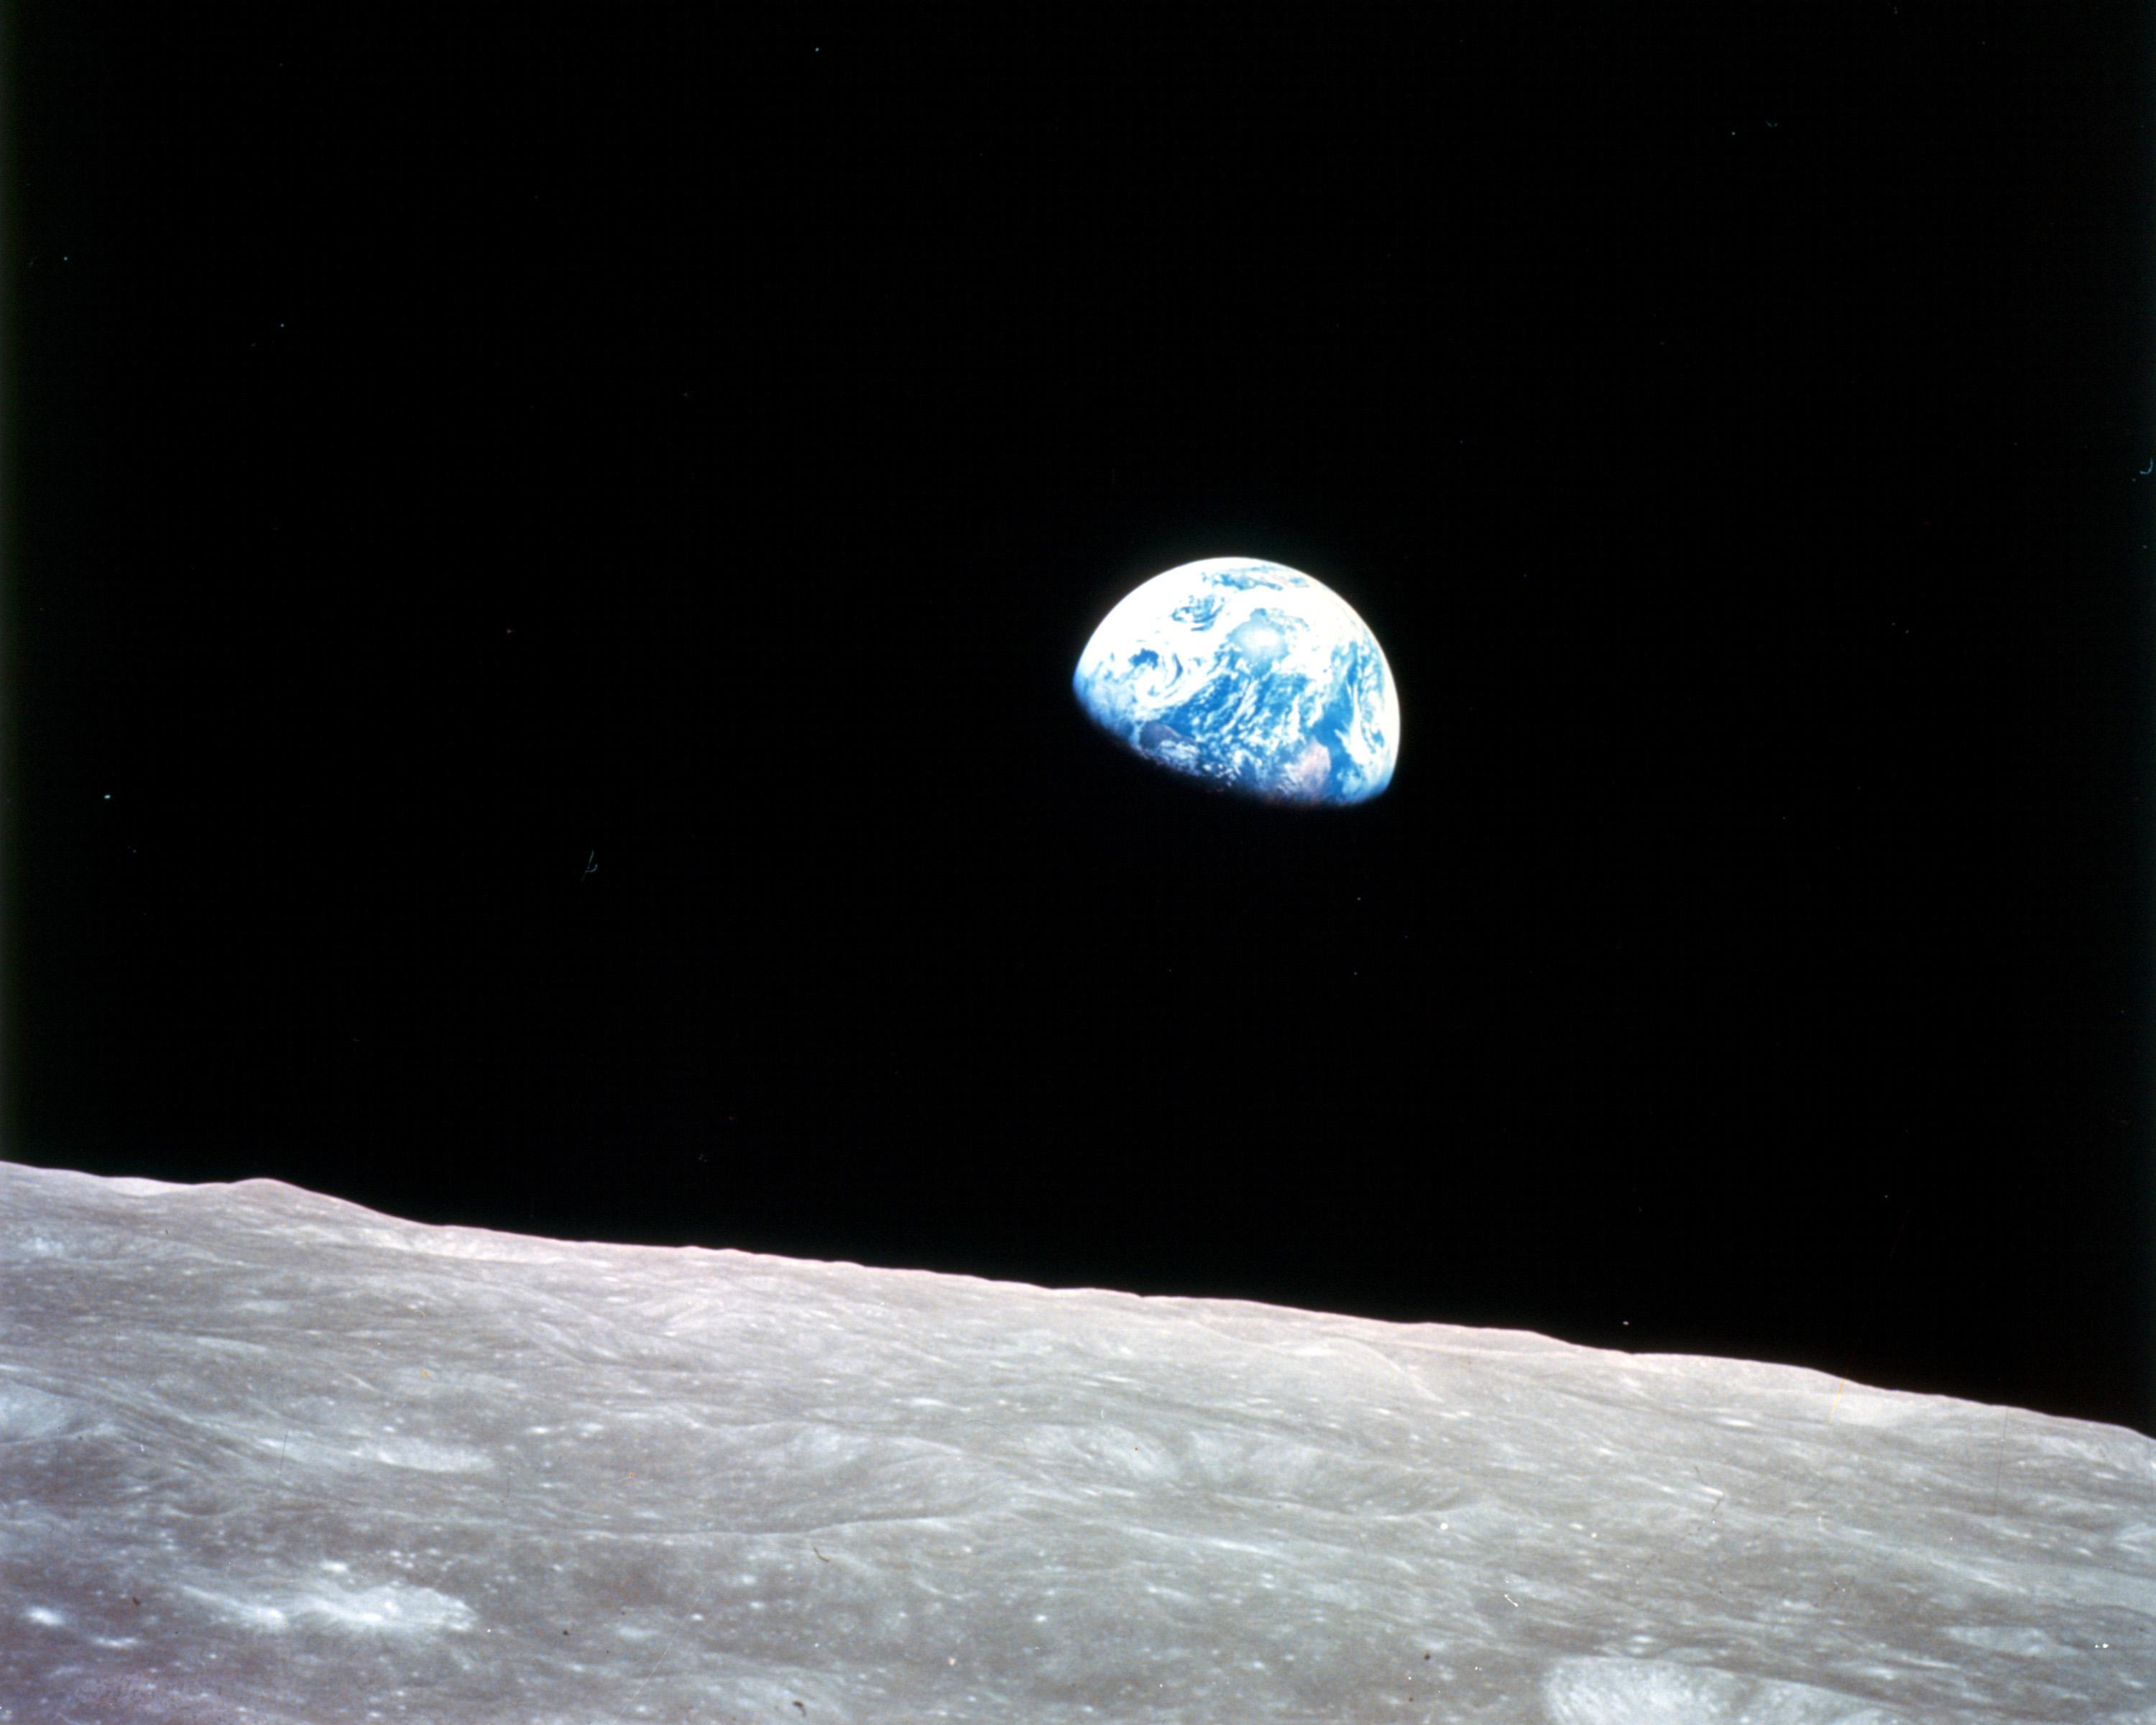 The imagery of the Earth is called "Global warming" He was first captured by astronauts during NASA's Apollo 8 lunar-orbiting mission in Dec.  24, 1968. The film is often associated with the environmental movement that led to the establishment of Earth Day in the 1970s.